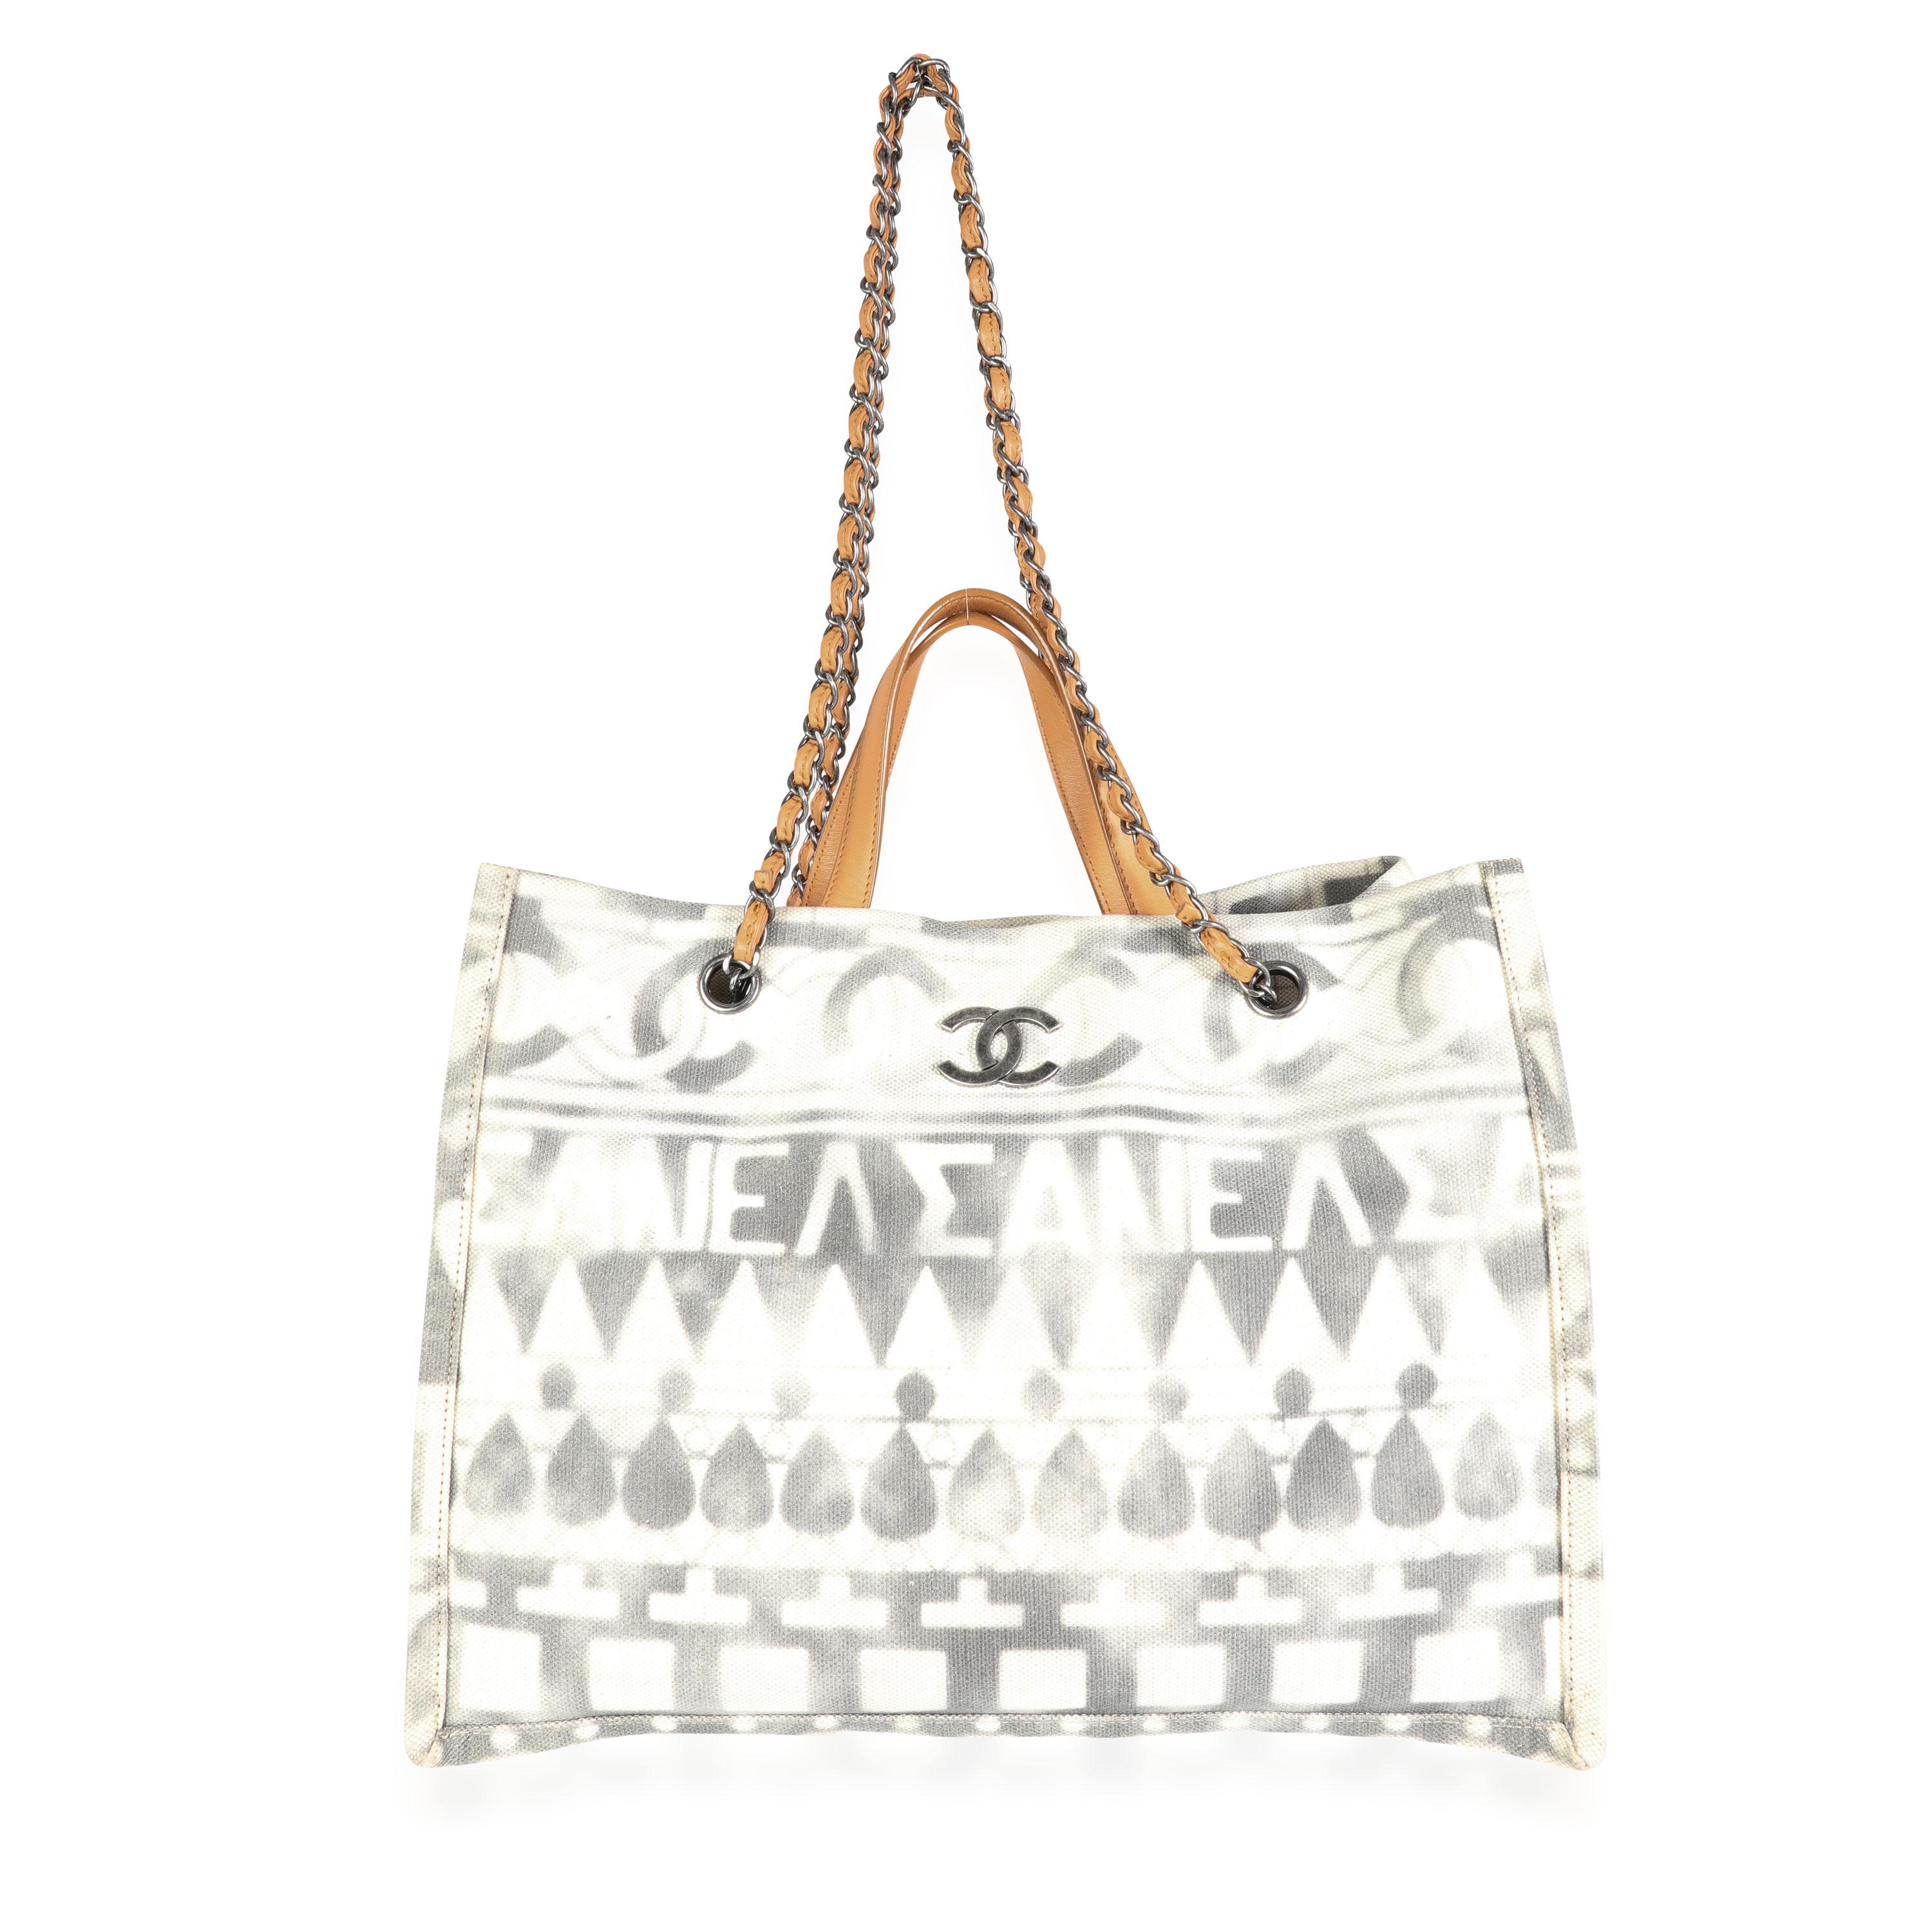 Listing Title: Chanel Iliad Printed Canvas Small Shopping Tote
SKU: 114880
Condition: Pre-owned (3000)
Condition Description: This gorgeous canvas Shopping Tote, created for Chanel's Greece inspired Cruise 2018 Collection, features a faded 'Iliad'